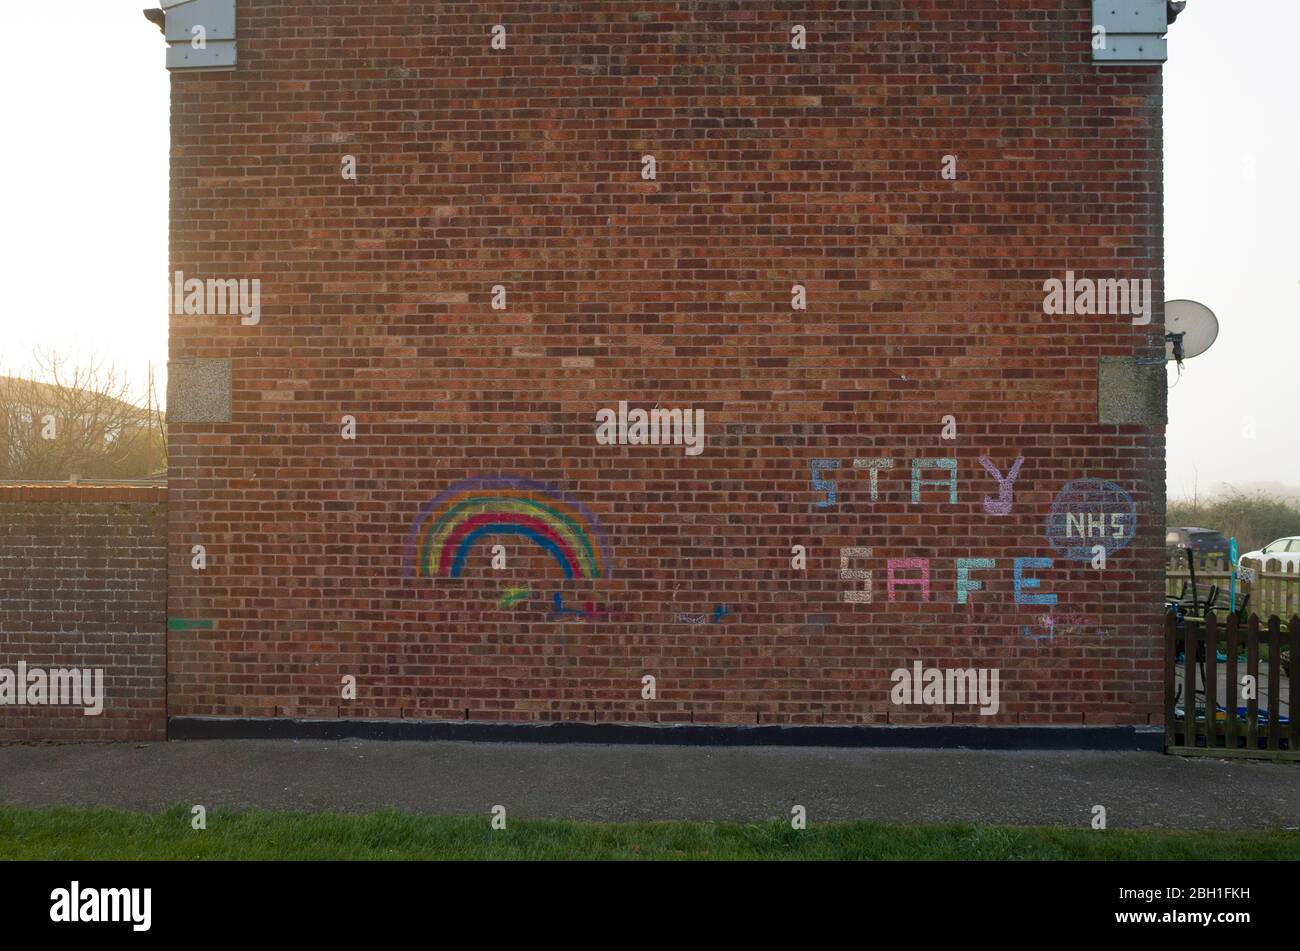 Chalk writing on a house wall in England about NHS Stay Safe Coronavirus Covid-19 Stock Photo